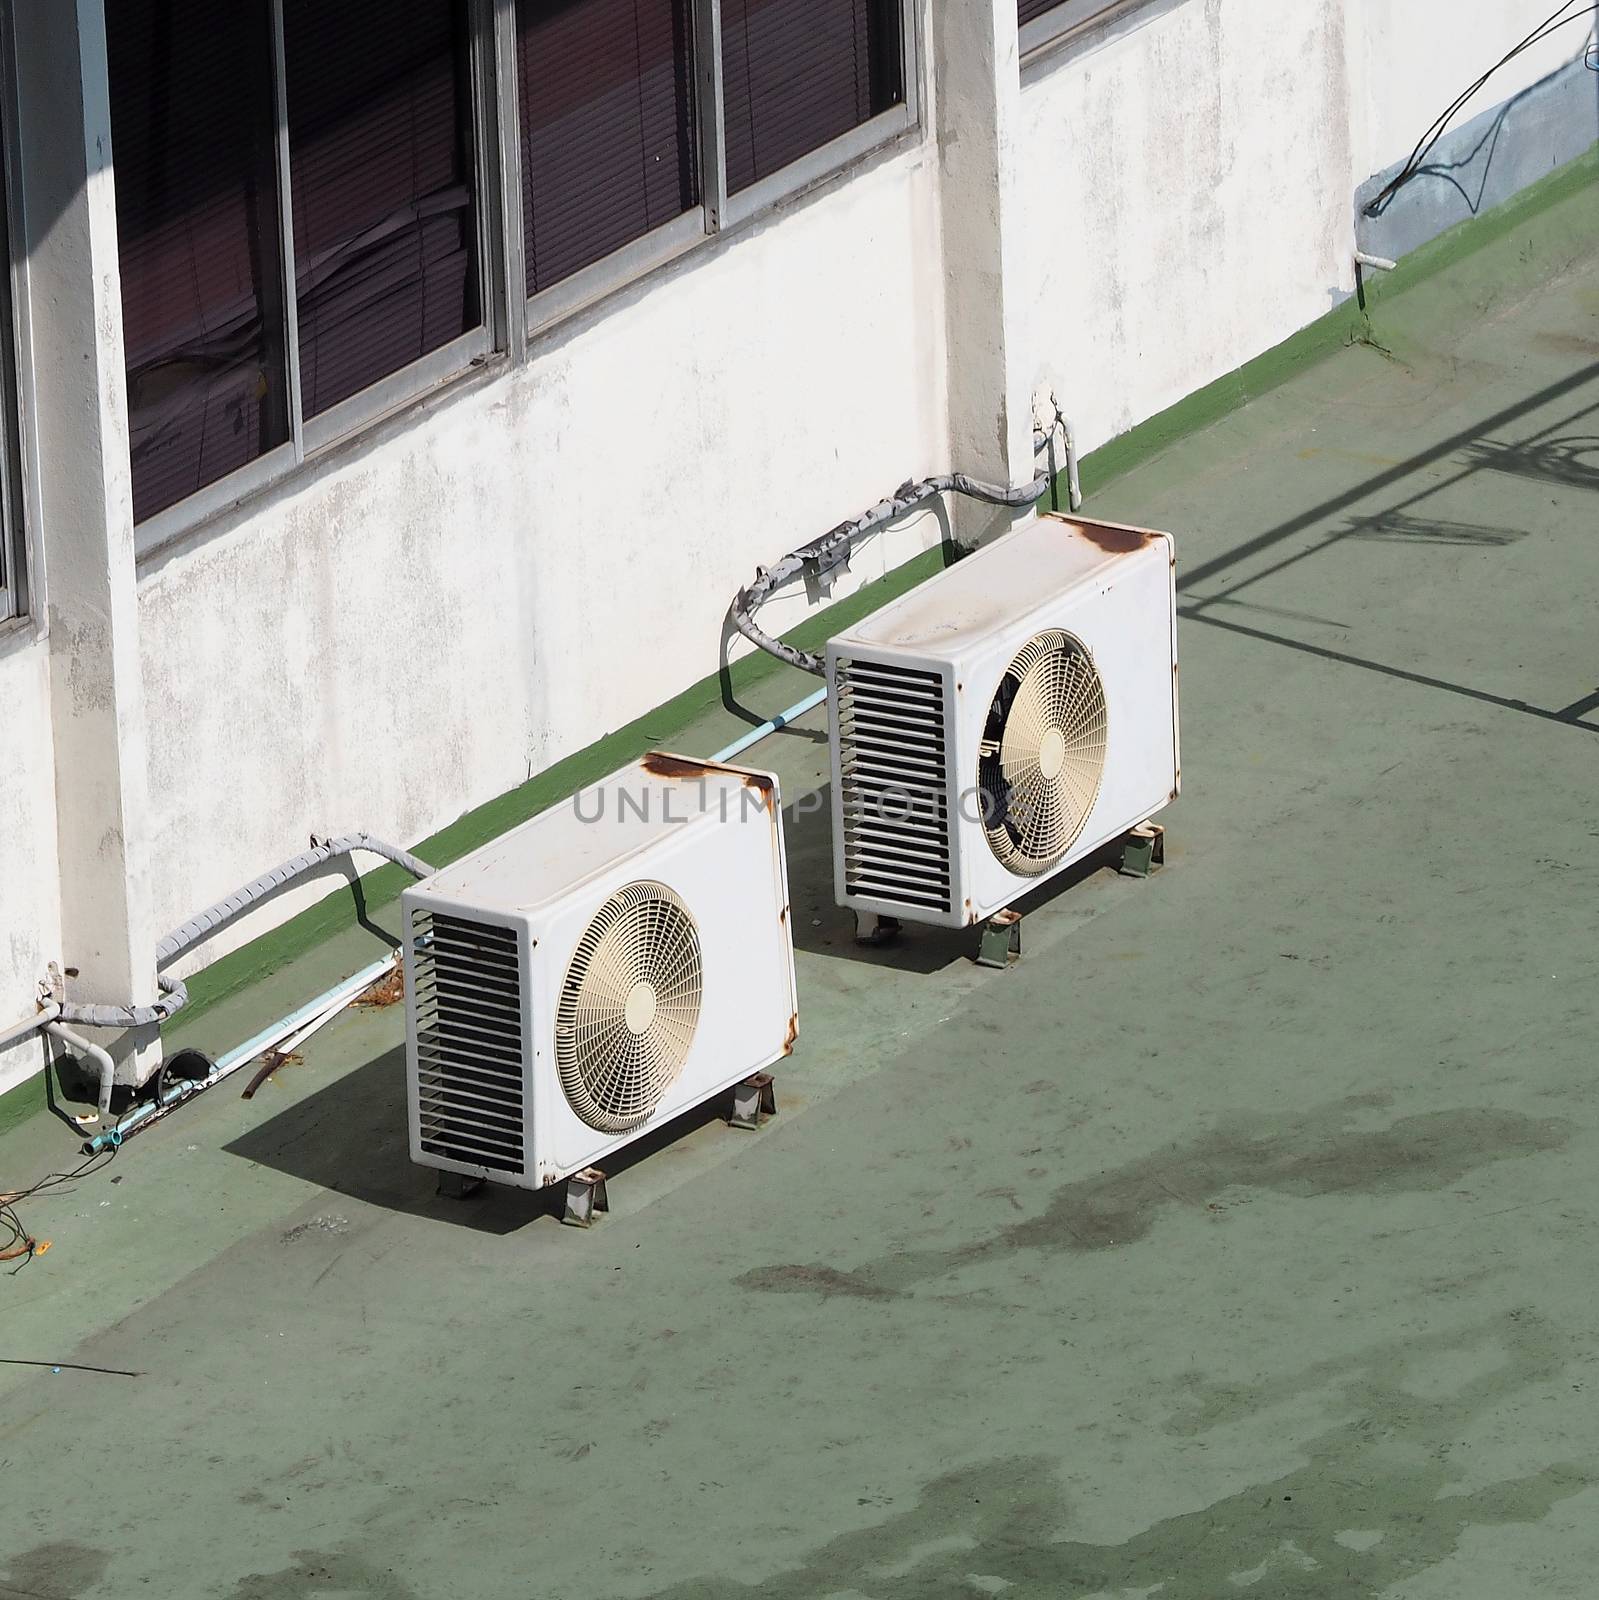 Old air conditioner Compressor on the terrace space and outdoor in summer daytime Bangkok Thailand and top view angle shot.